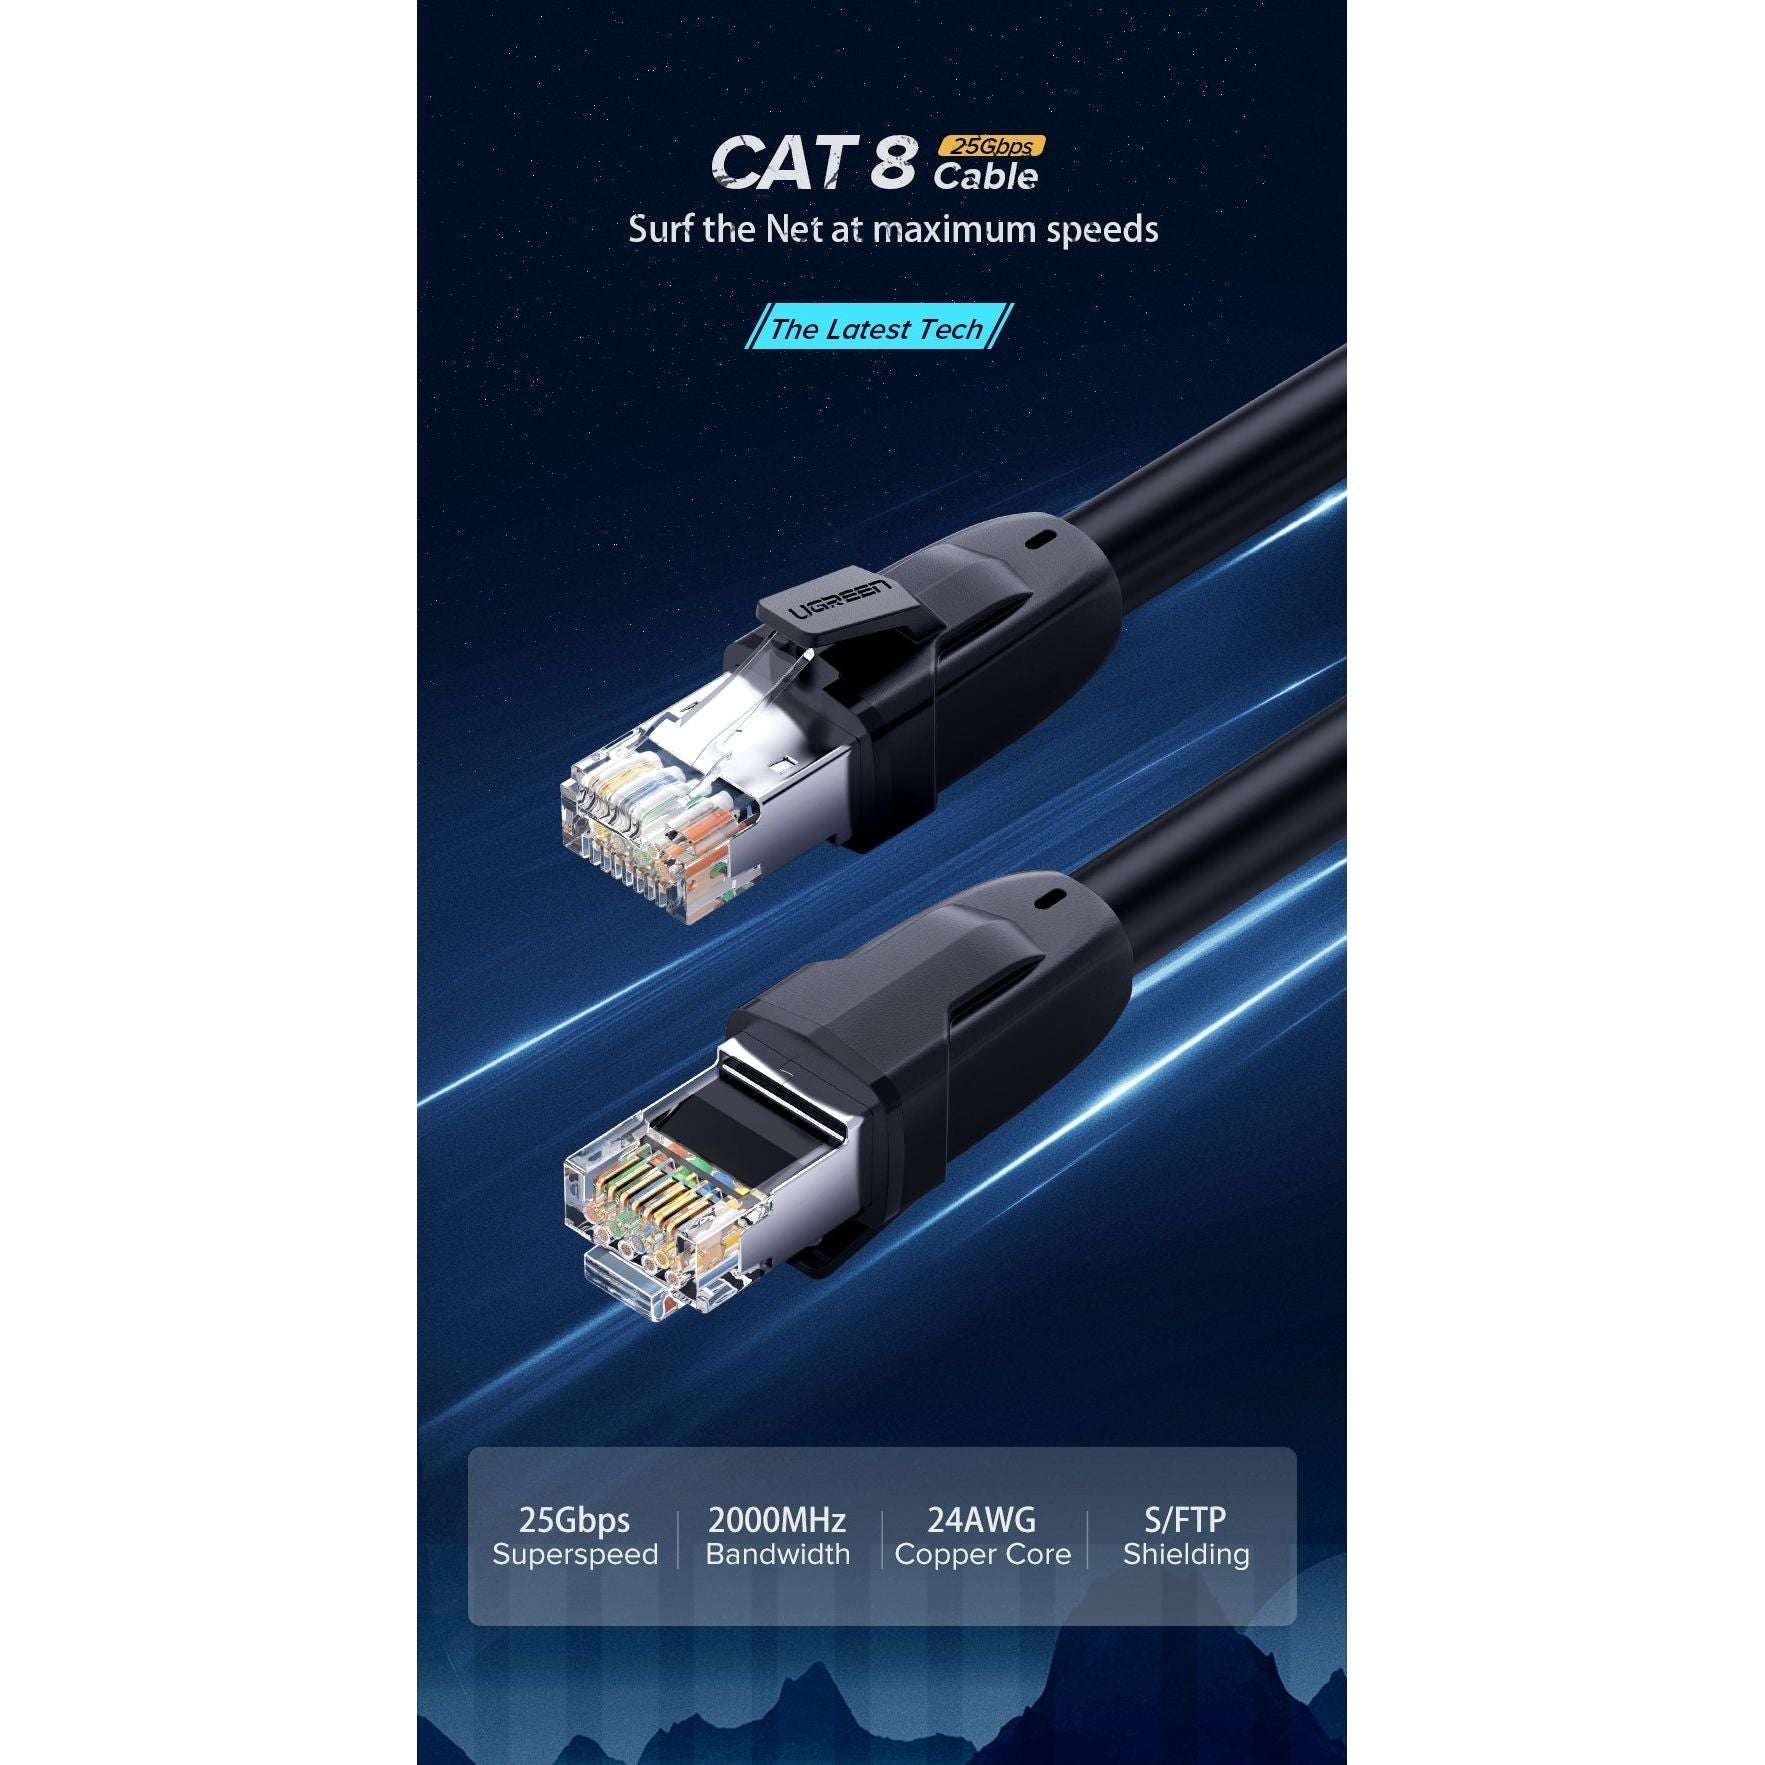 UGREEN 70329 Cat 8 Pure Copper Patch Cord Network Cable 2M